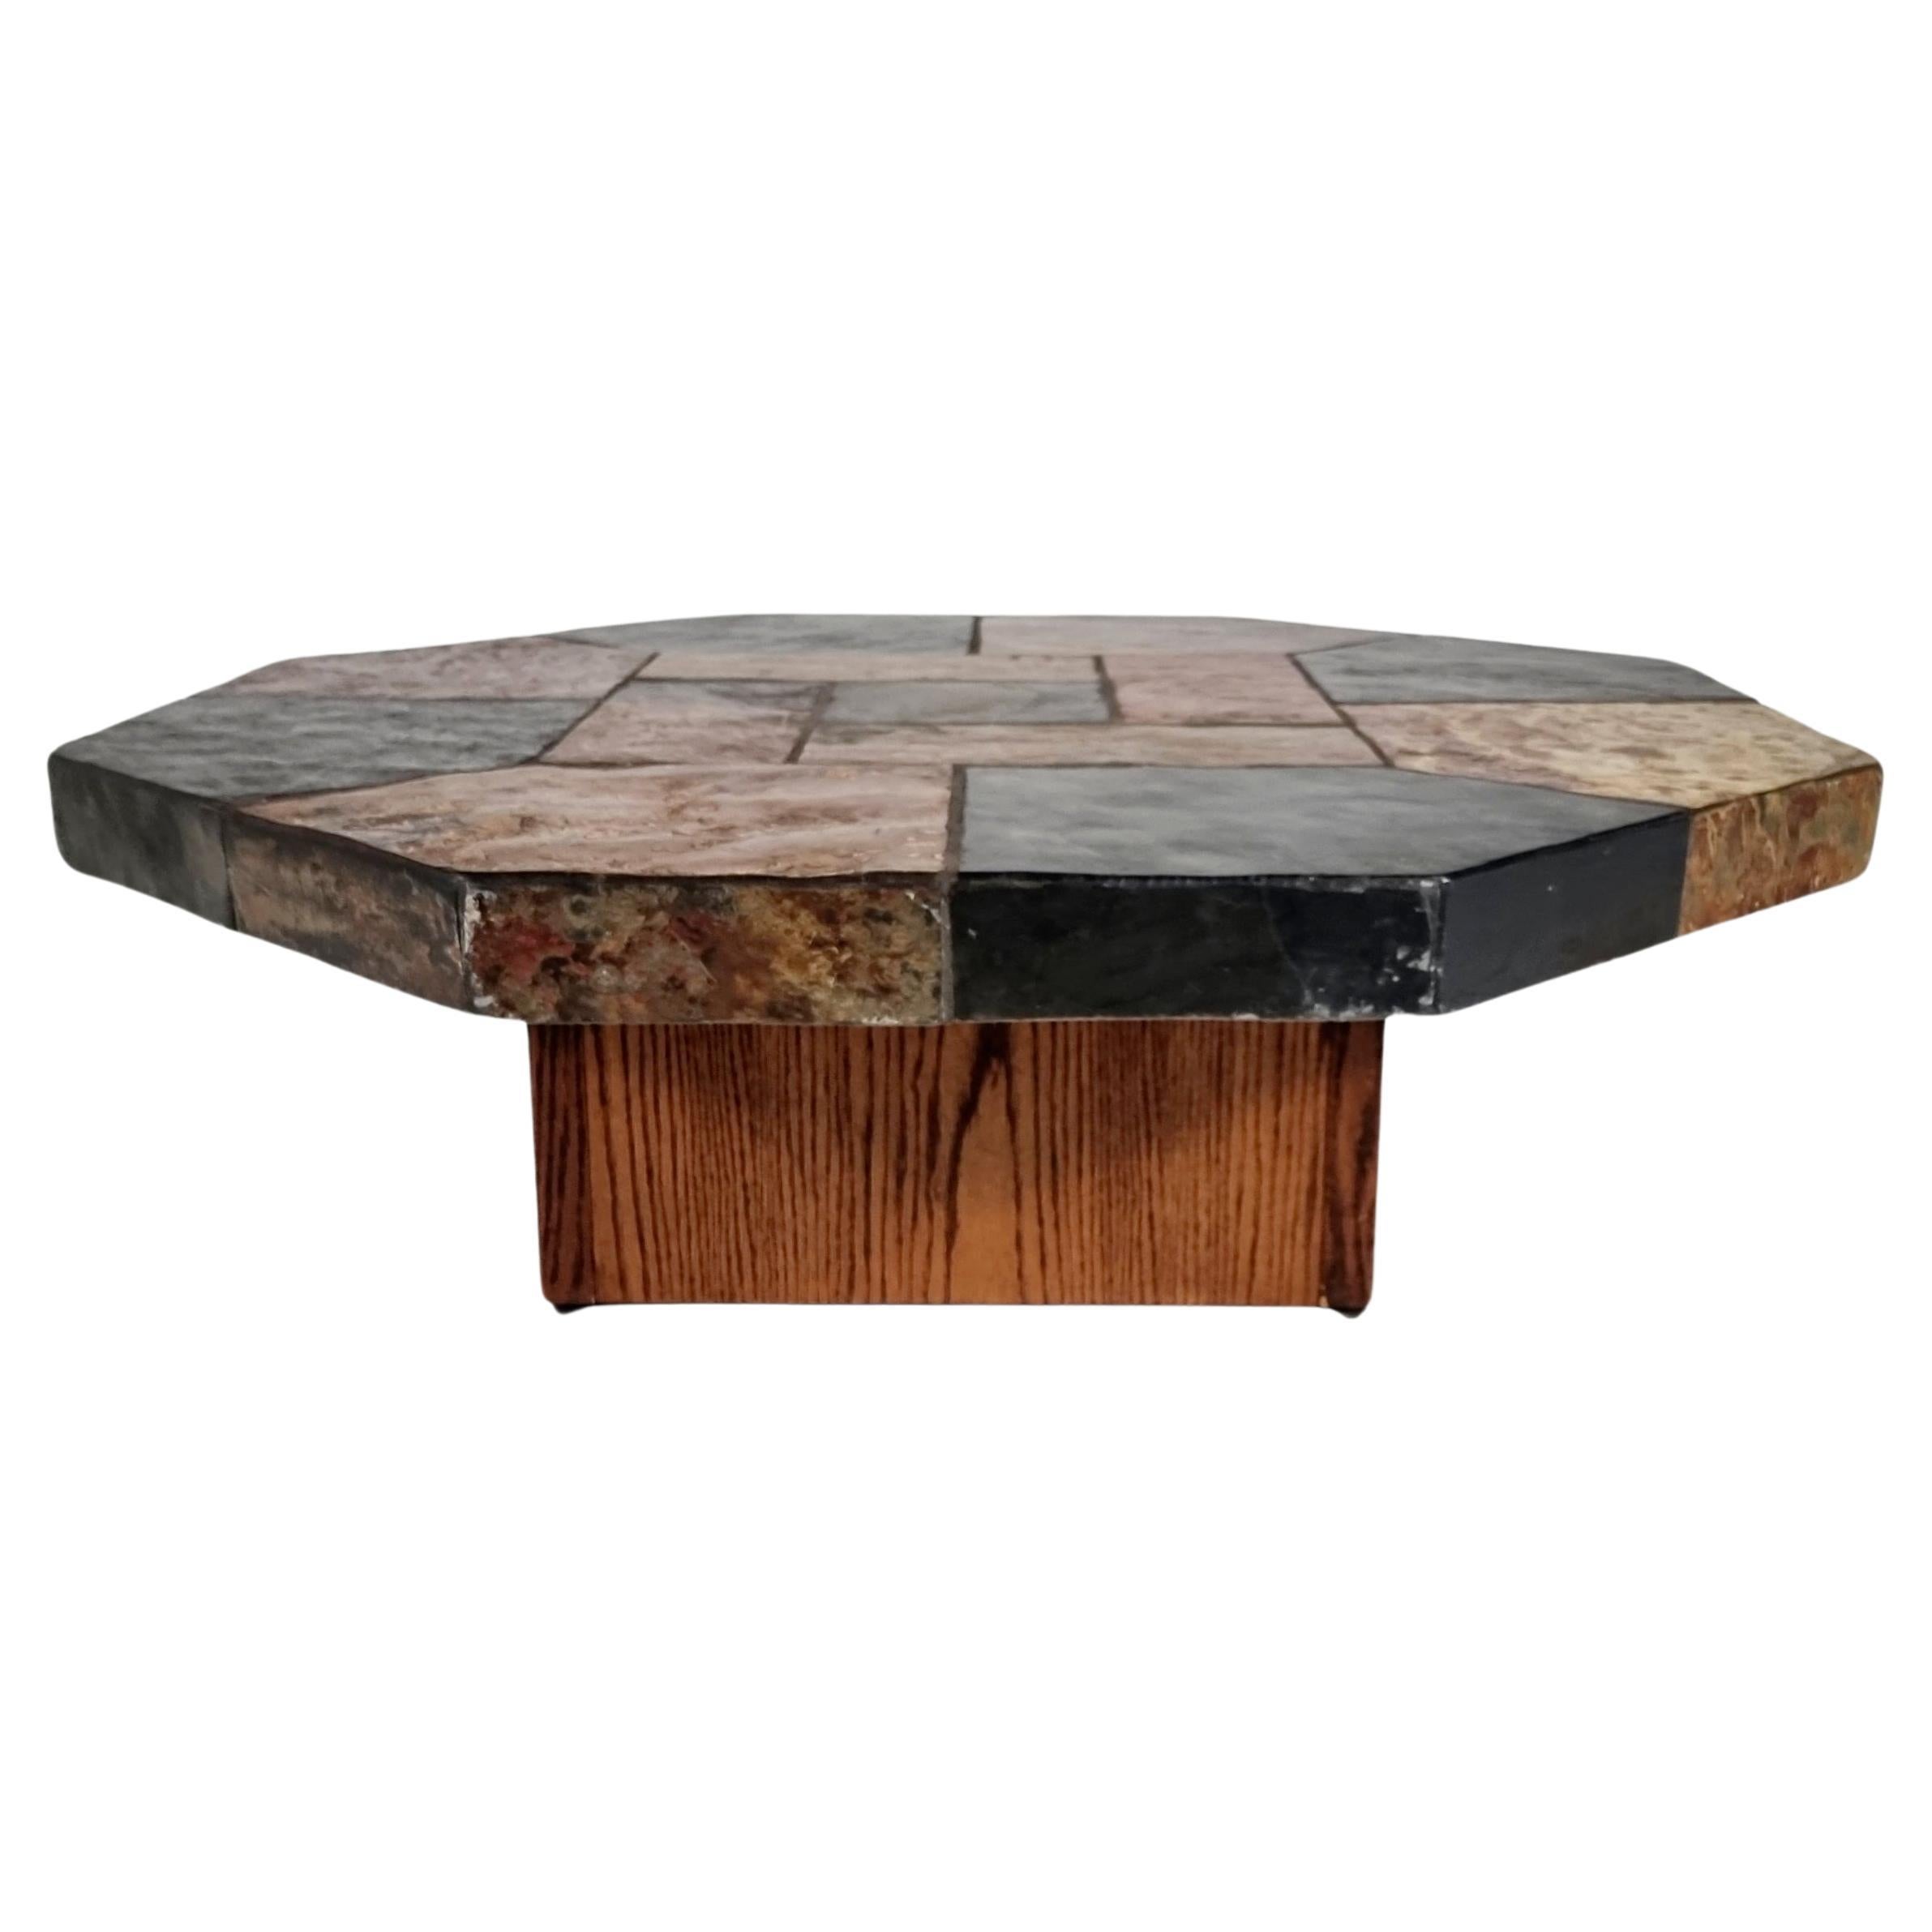 Brutalist slate stone and wood hexagonal coffee table, Belgium, 1970s

This piece is heavy, forming a rock-solid statement piece in your living room. It is composed of all kinds of differently shaped natural stone and has a beautiful color scheme.

